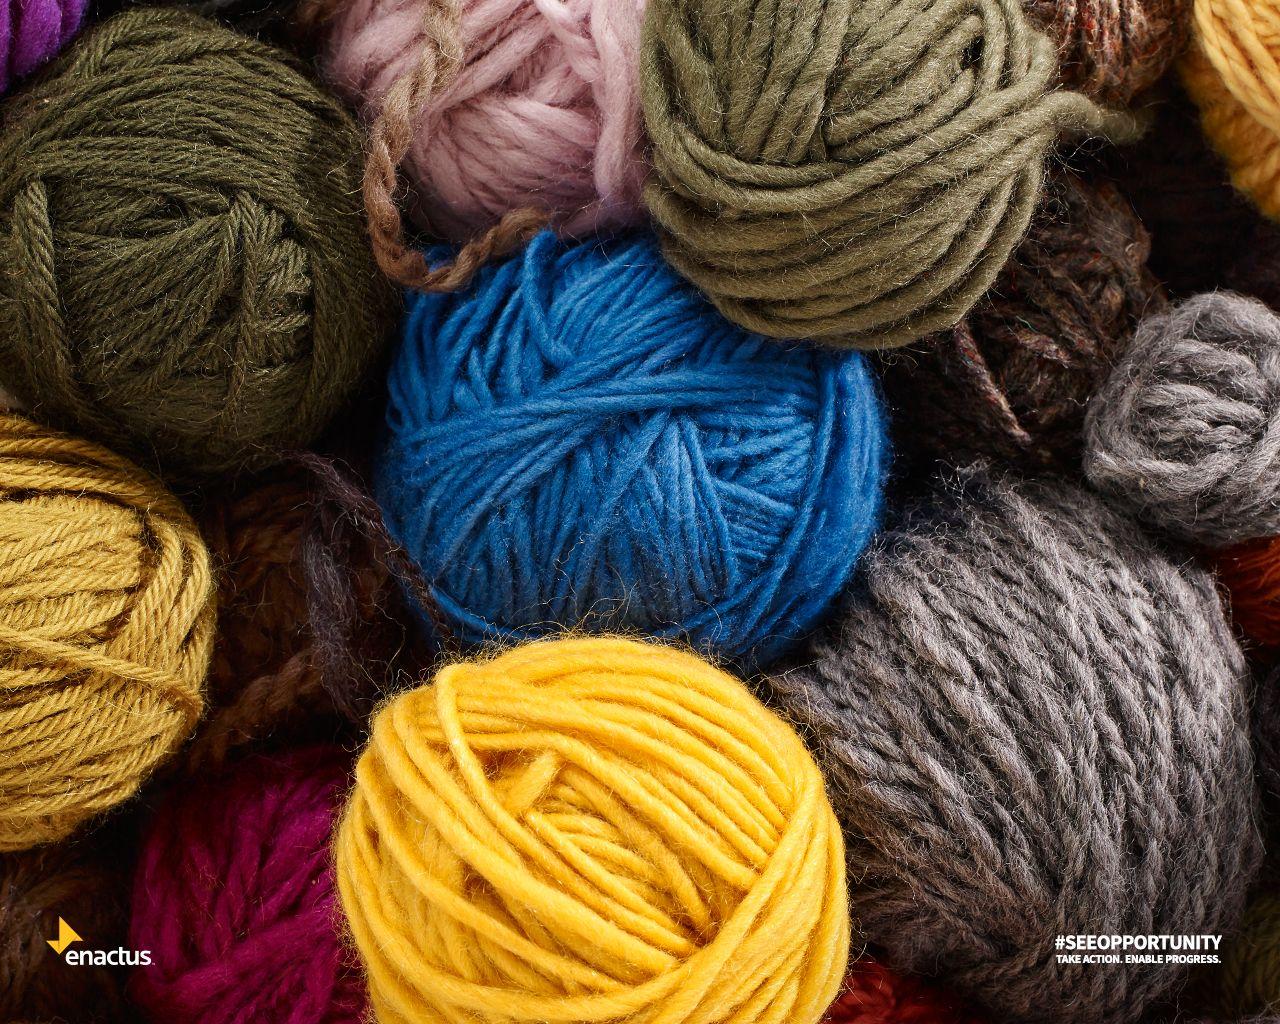 Yarn or Lifeline, What Do You See?